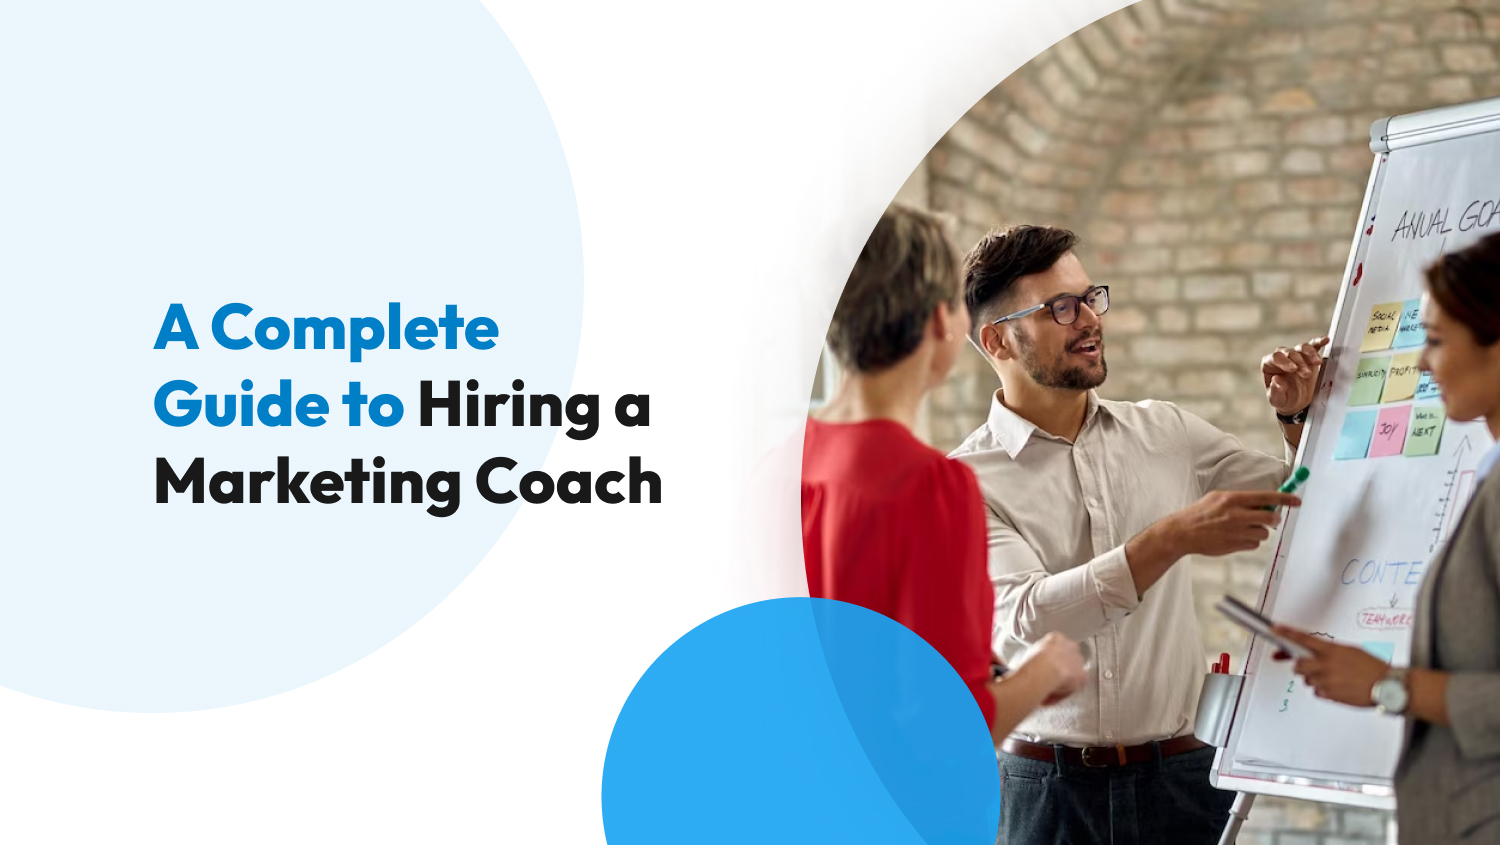 A Complete Guide to Hiring a Marketing Coach